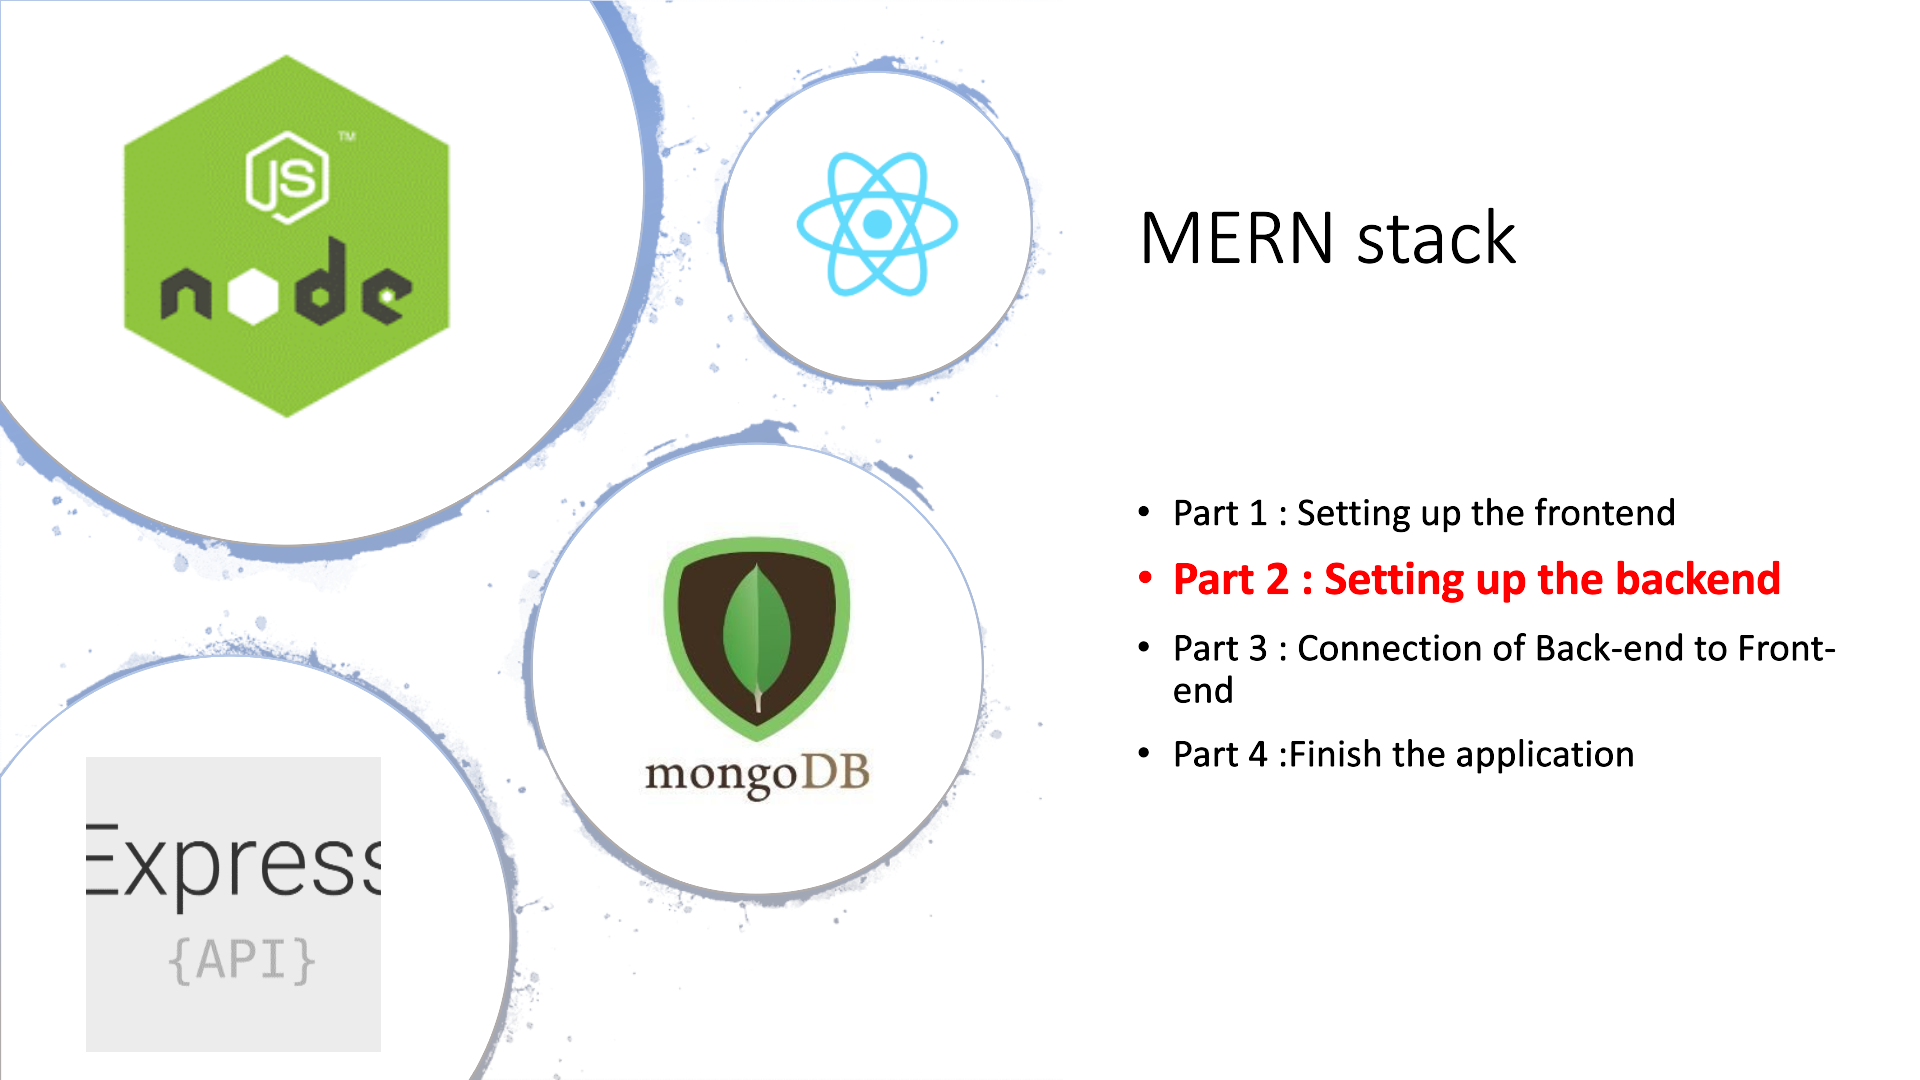 How to create a MERN stack app in 4 Steps easily? Section 2 Onurdesk